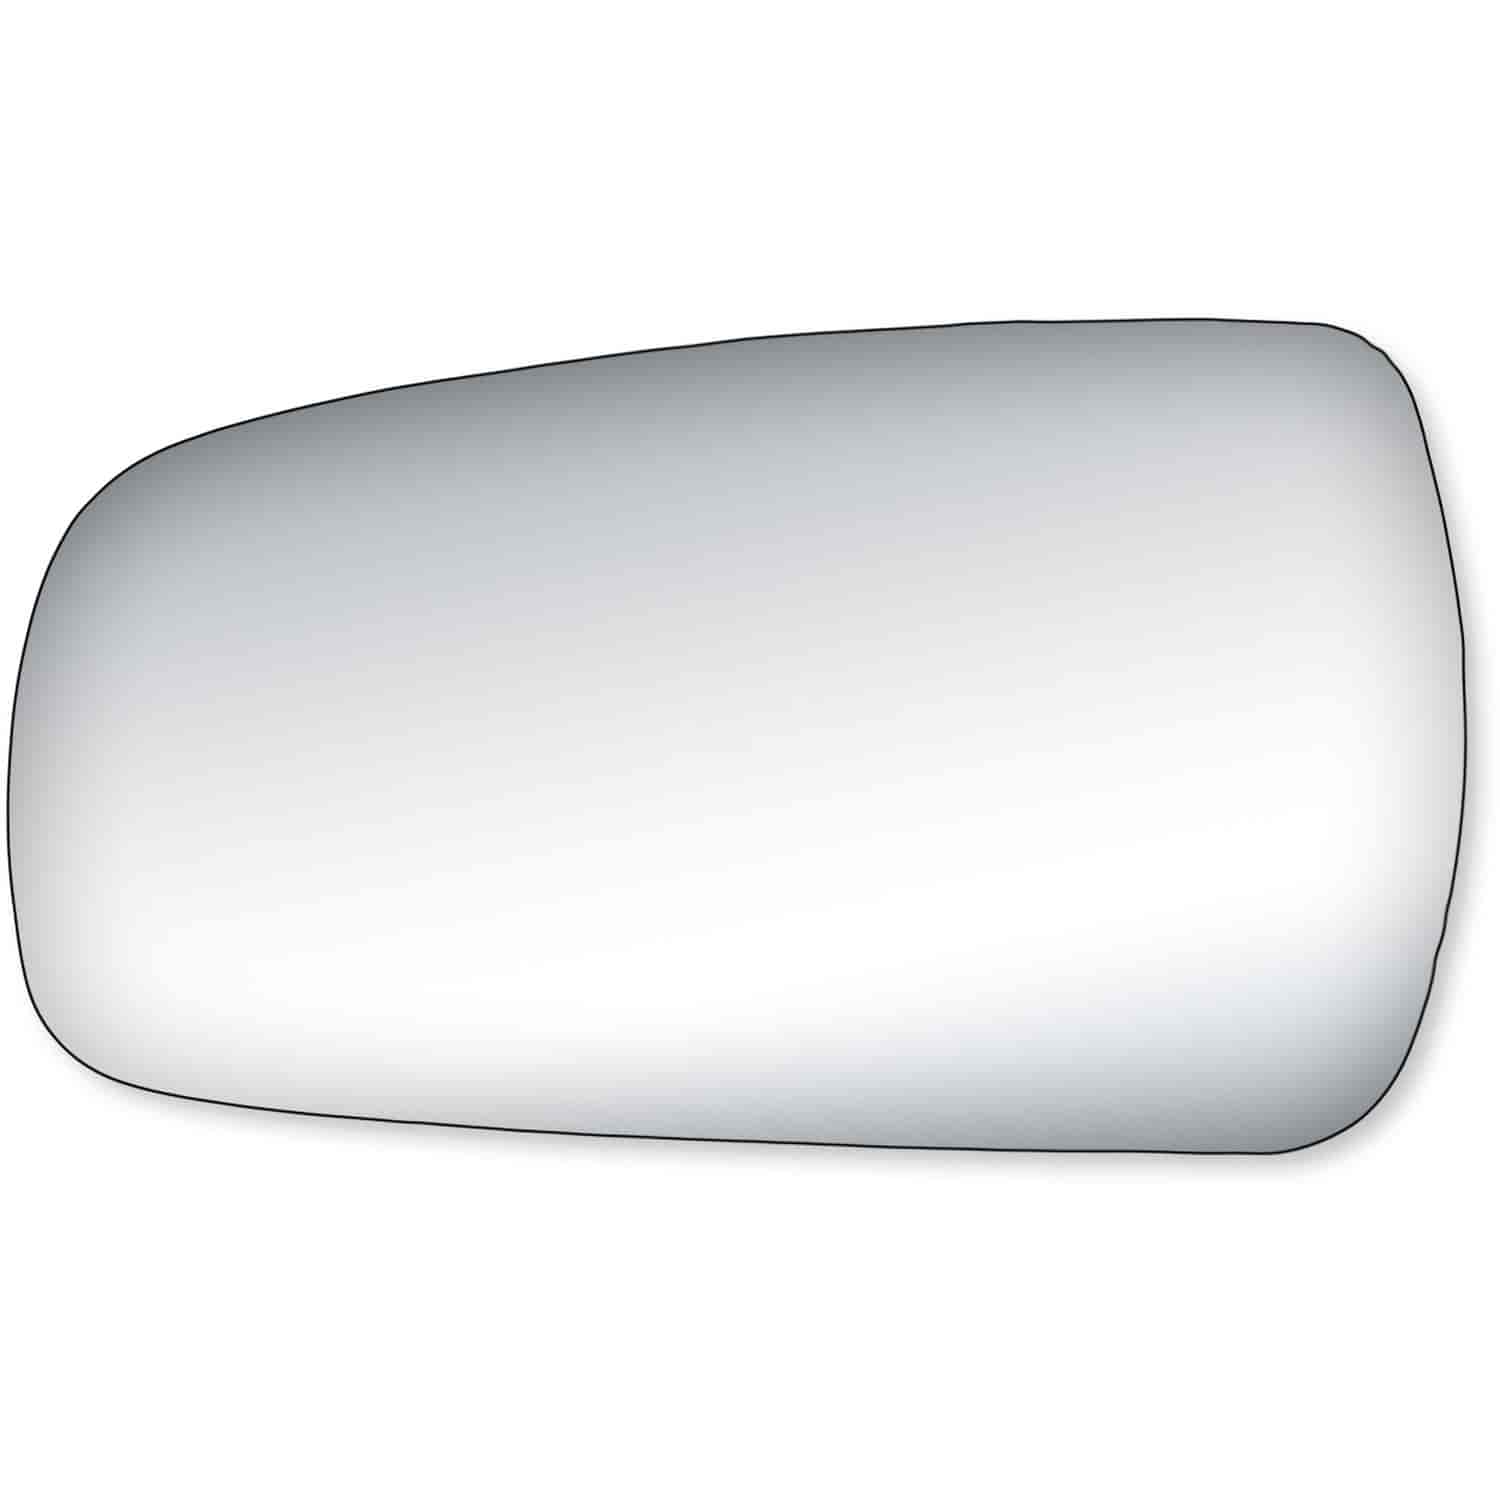 Replacement Glass for 96-99 Infiniti I30 ; 96-99